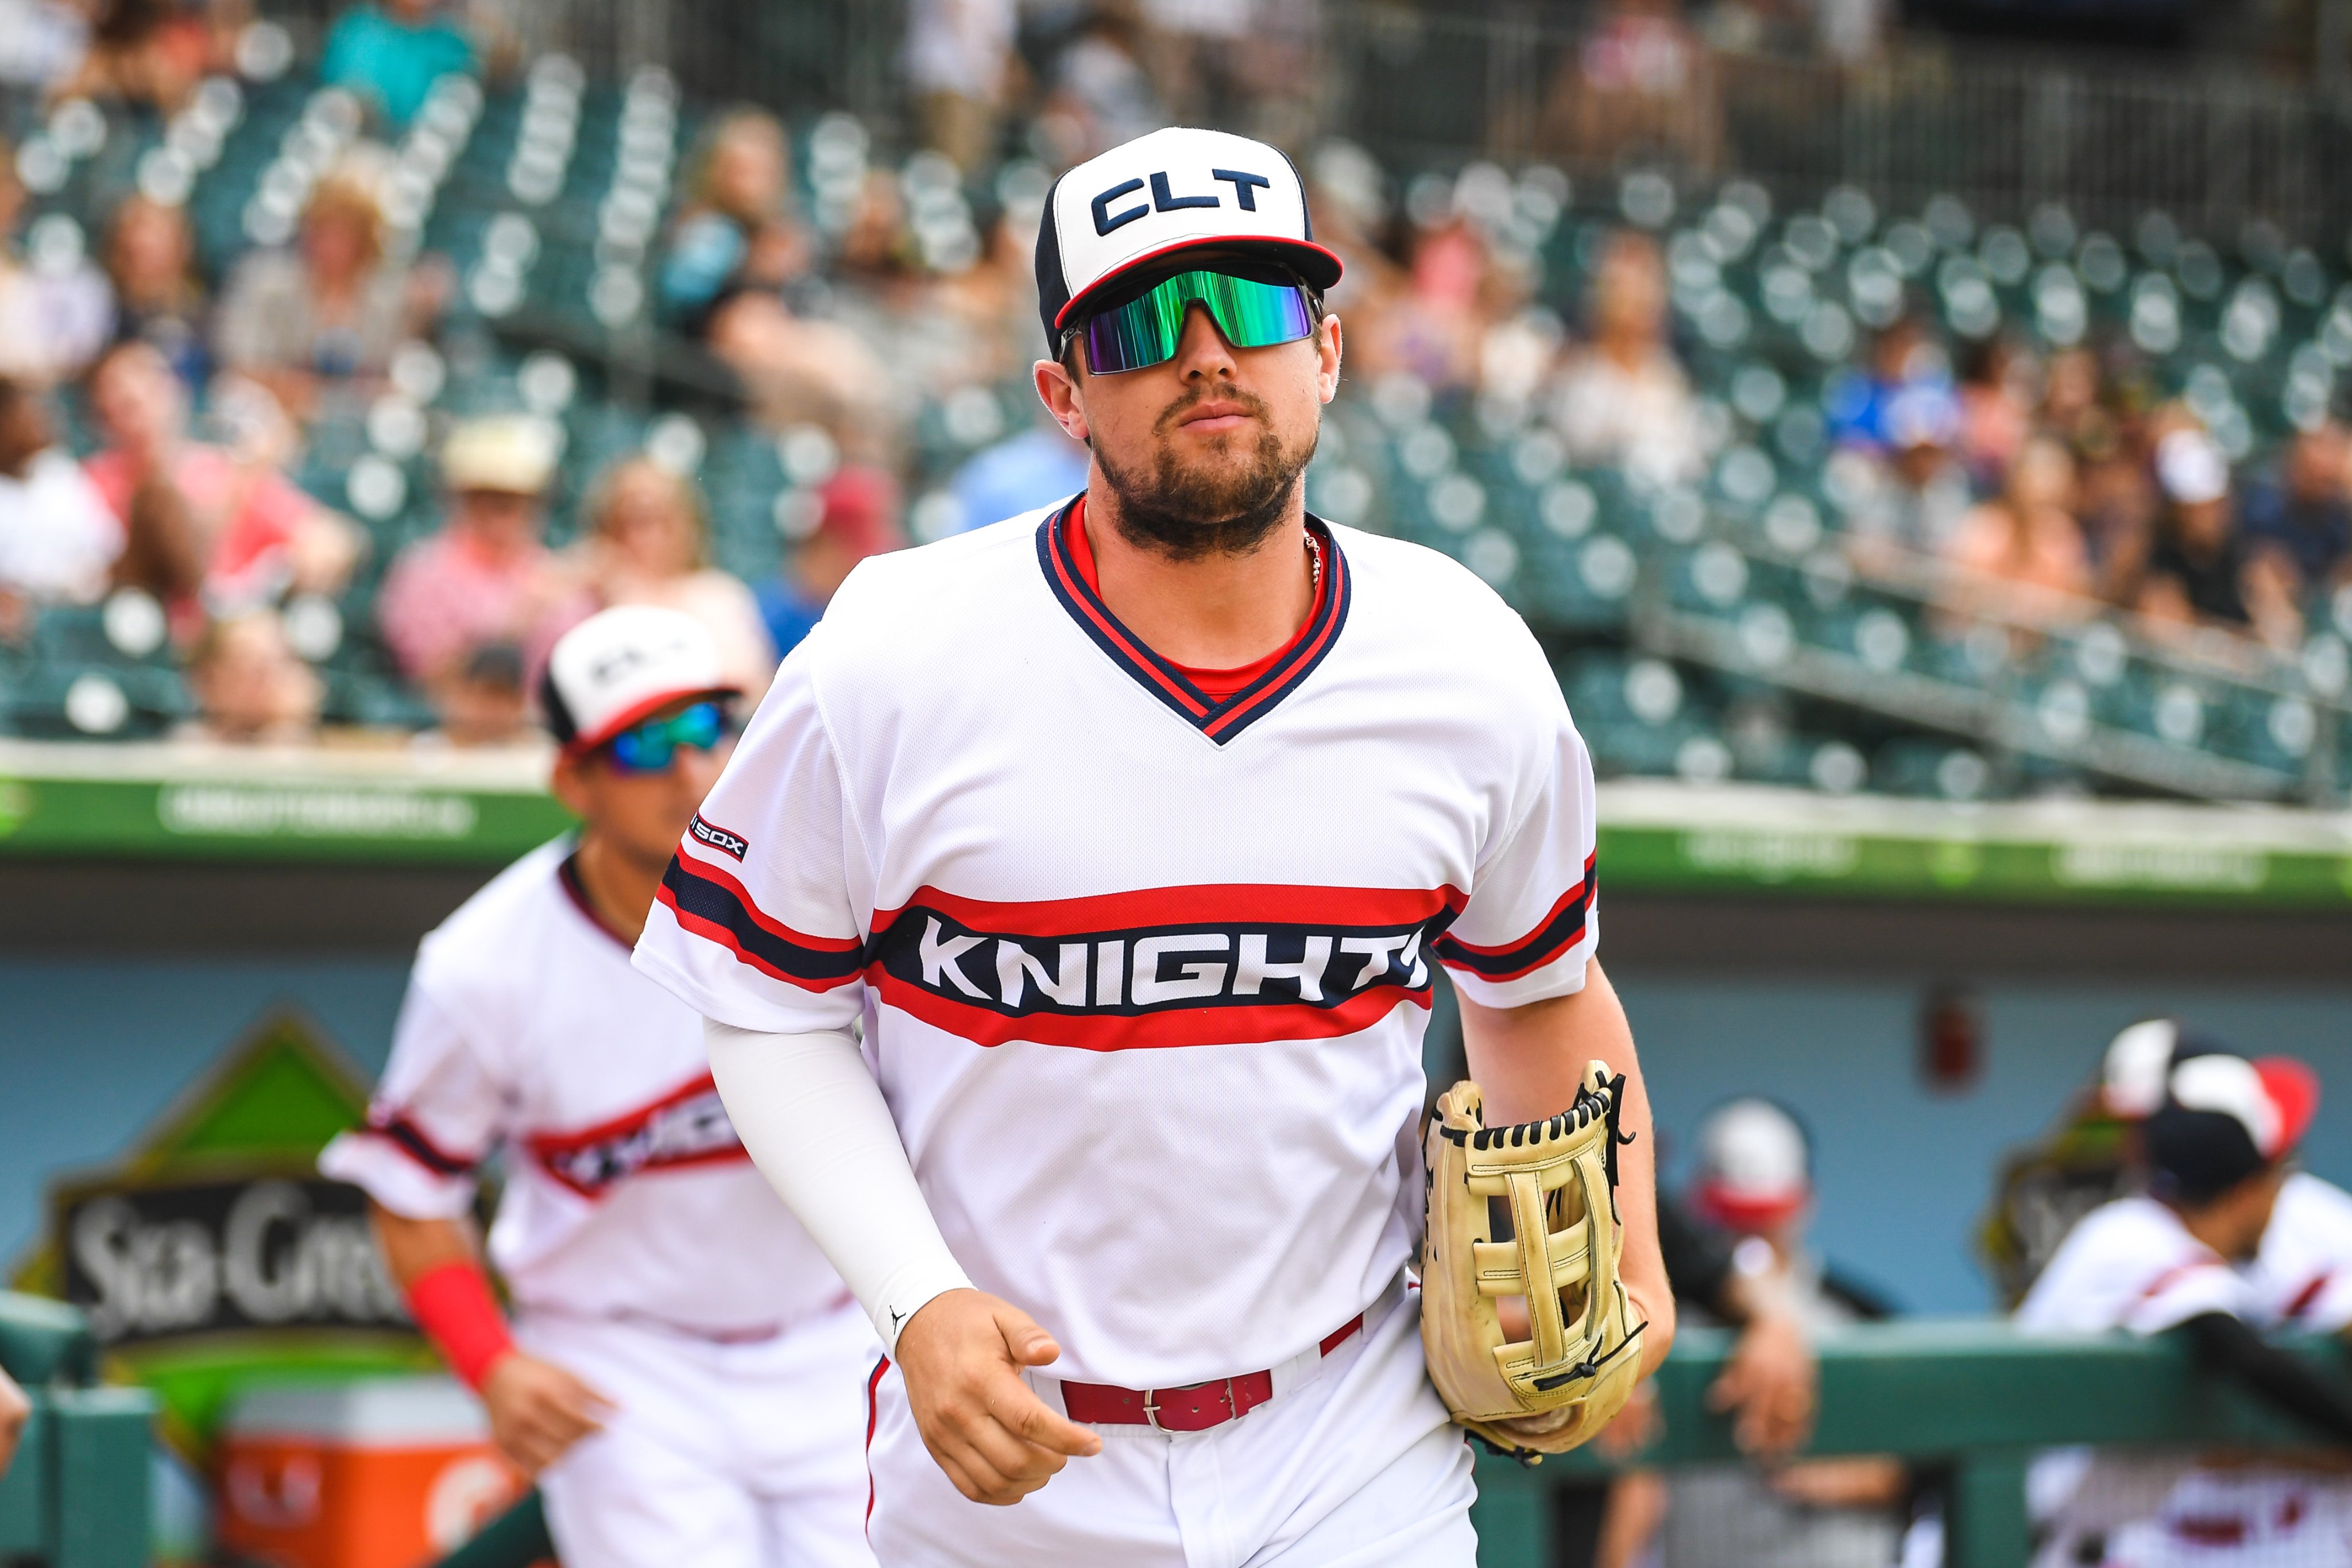 Charlotte Knights on X: Sundays are for #CLT unis